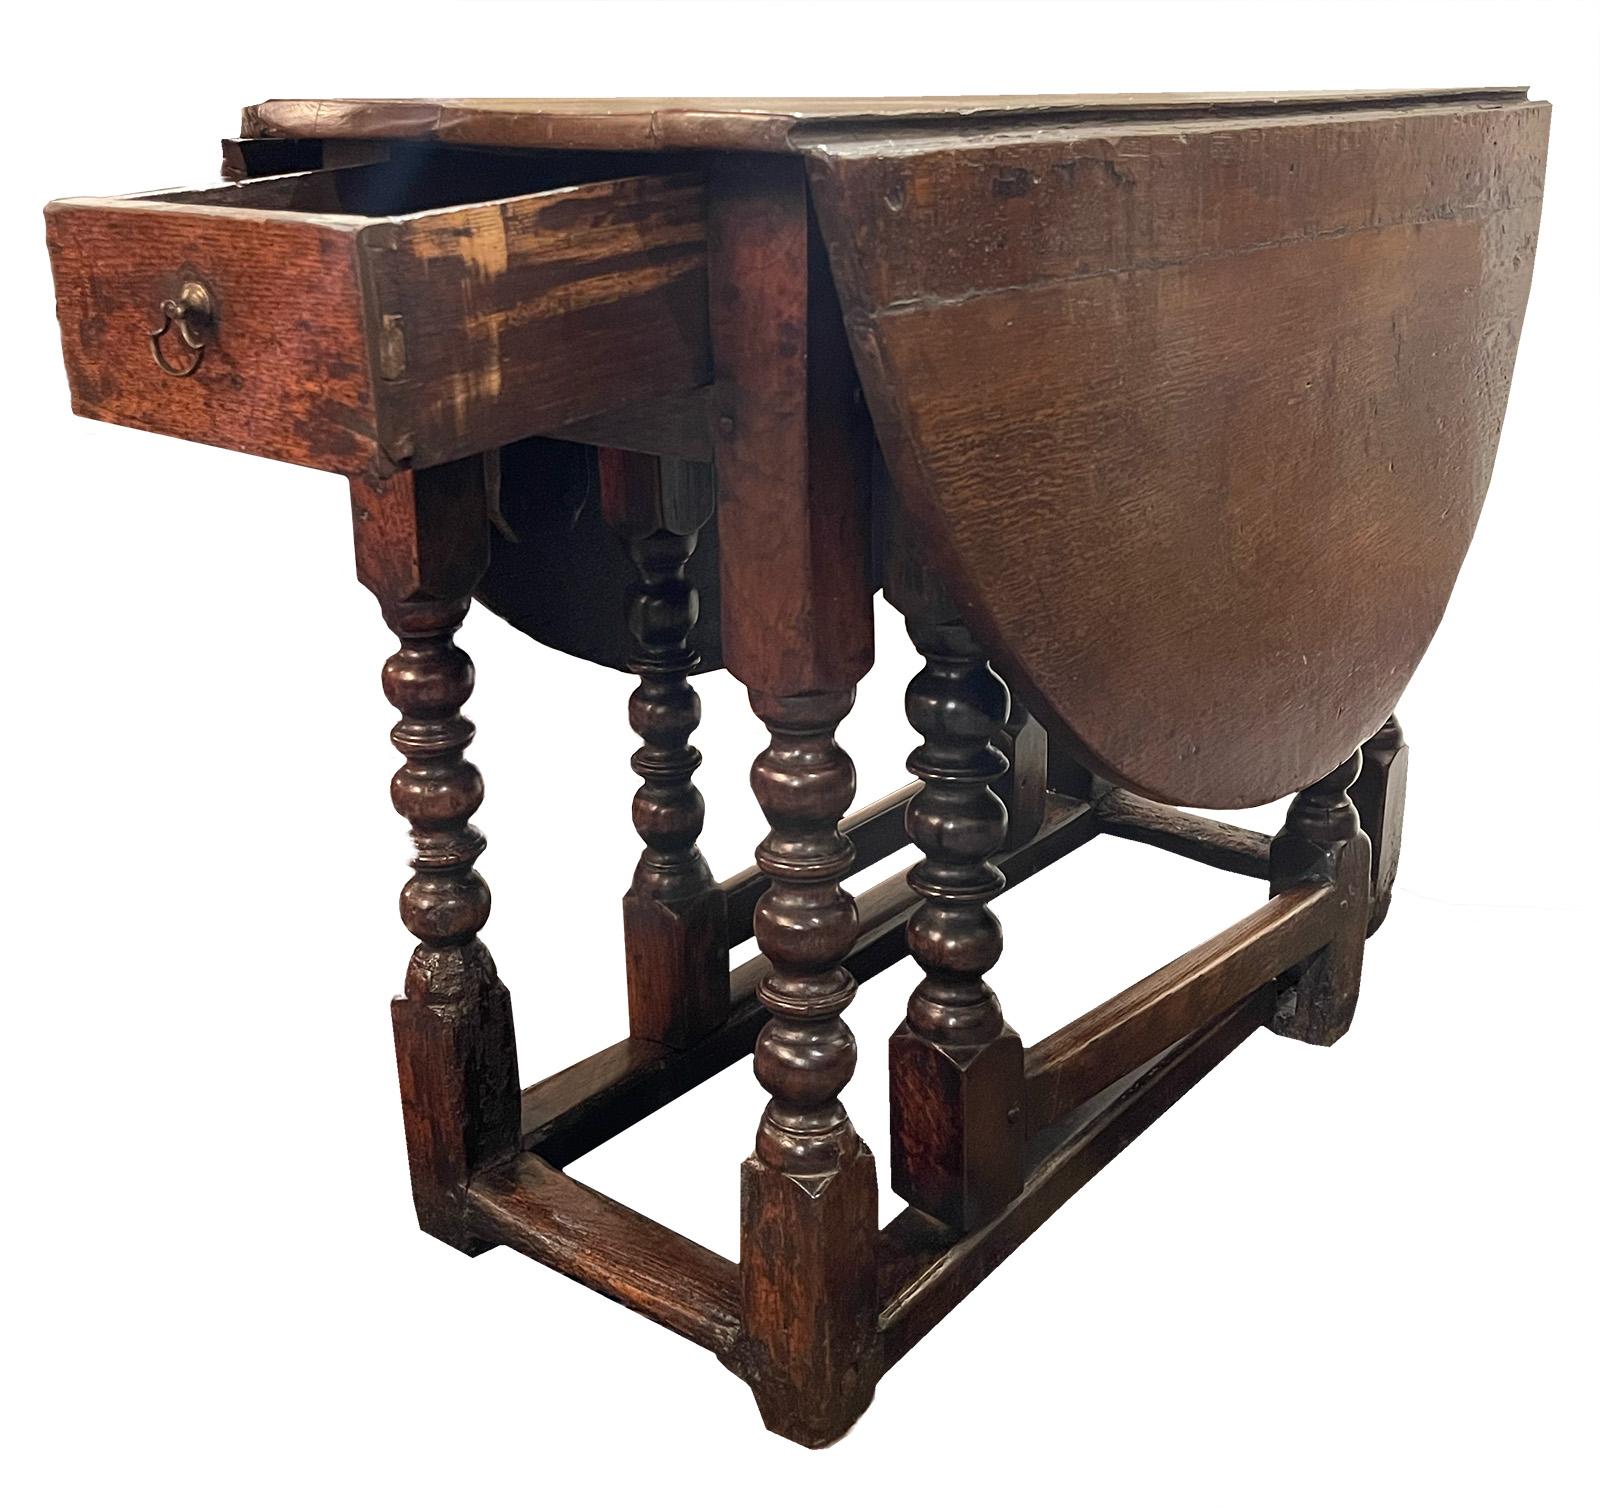 An 18th century English drop-leaf table made from walnut.

Dimensions: 49